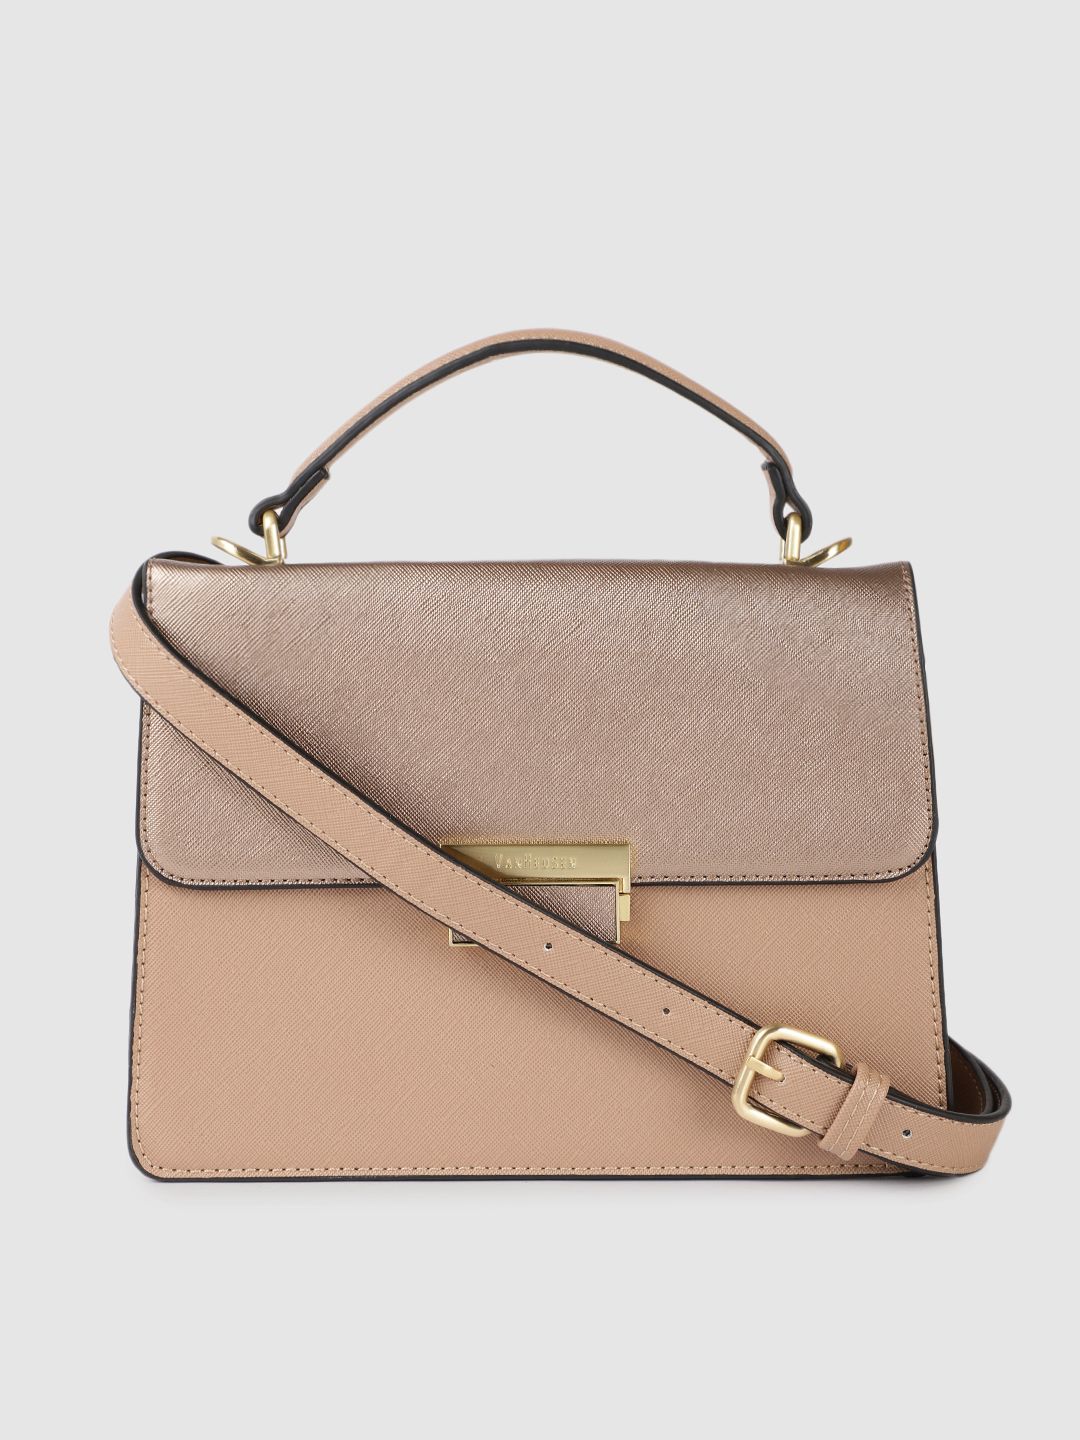 Van Heusen Rose Gold and Dusty Pink Colourblocked Structured Satchel Price in India